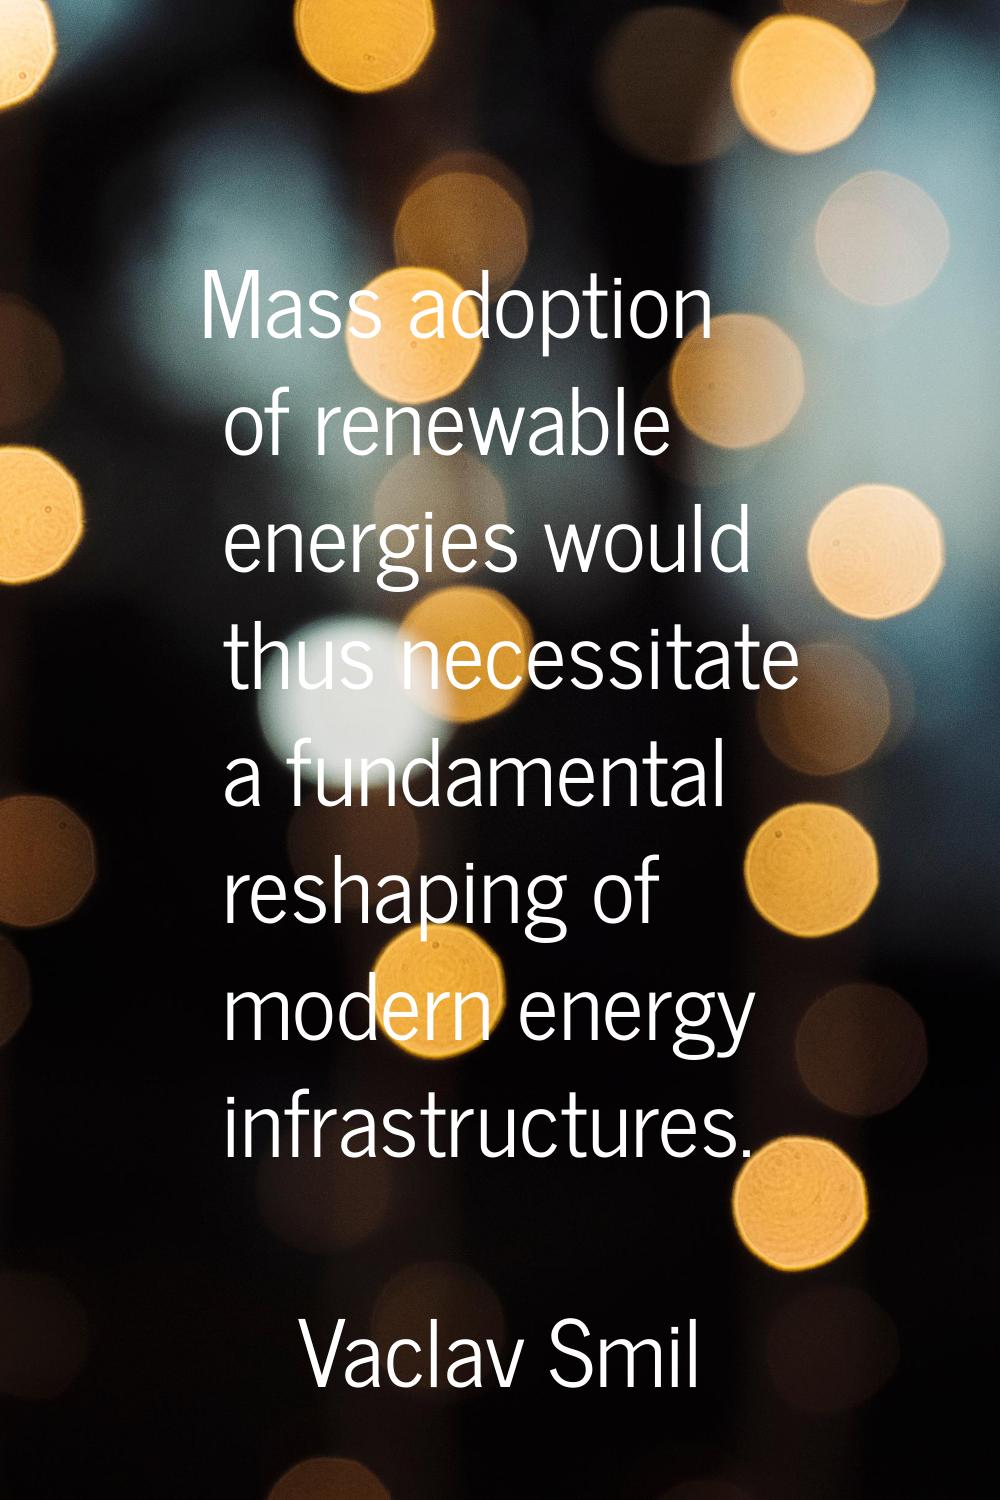 Mass adoption of renewable energies would thus necessitate a fundamental reshaping of modern energy